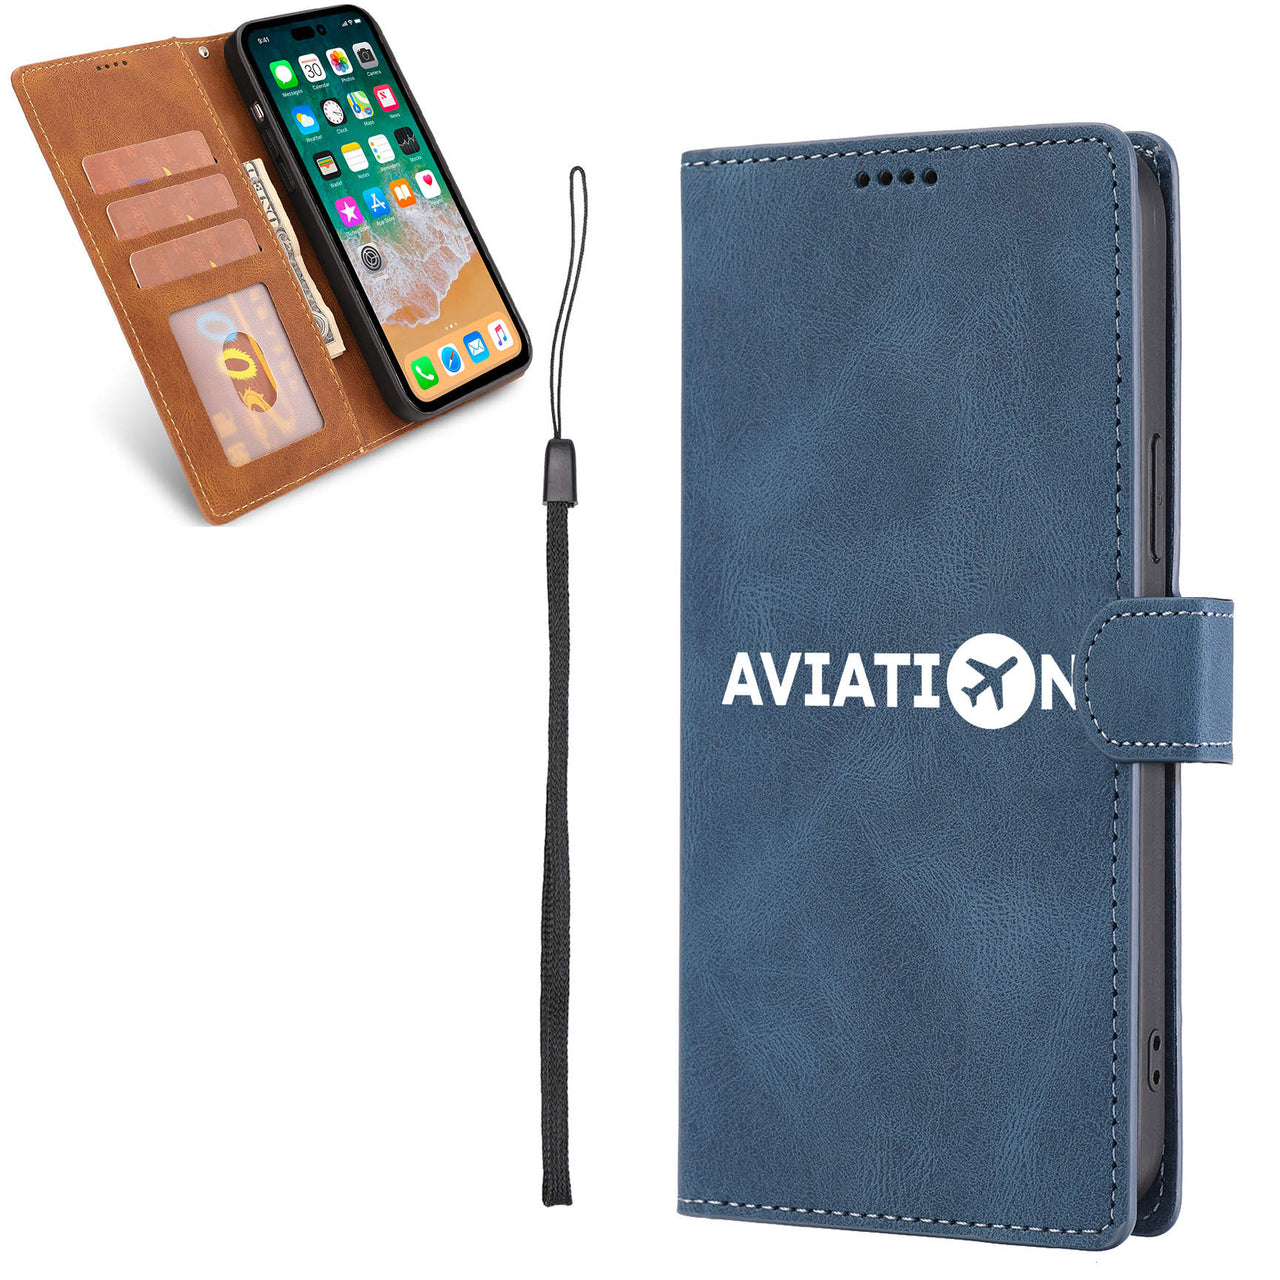 Aviation Designed Leather iPhone Cases